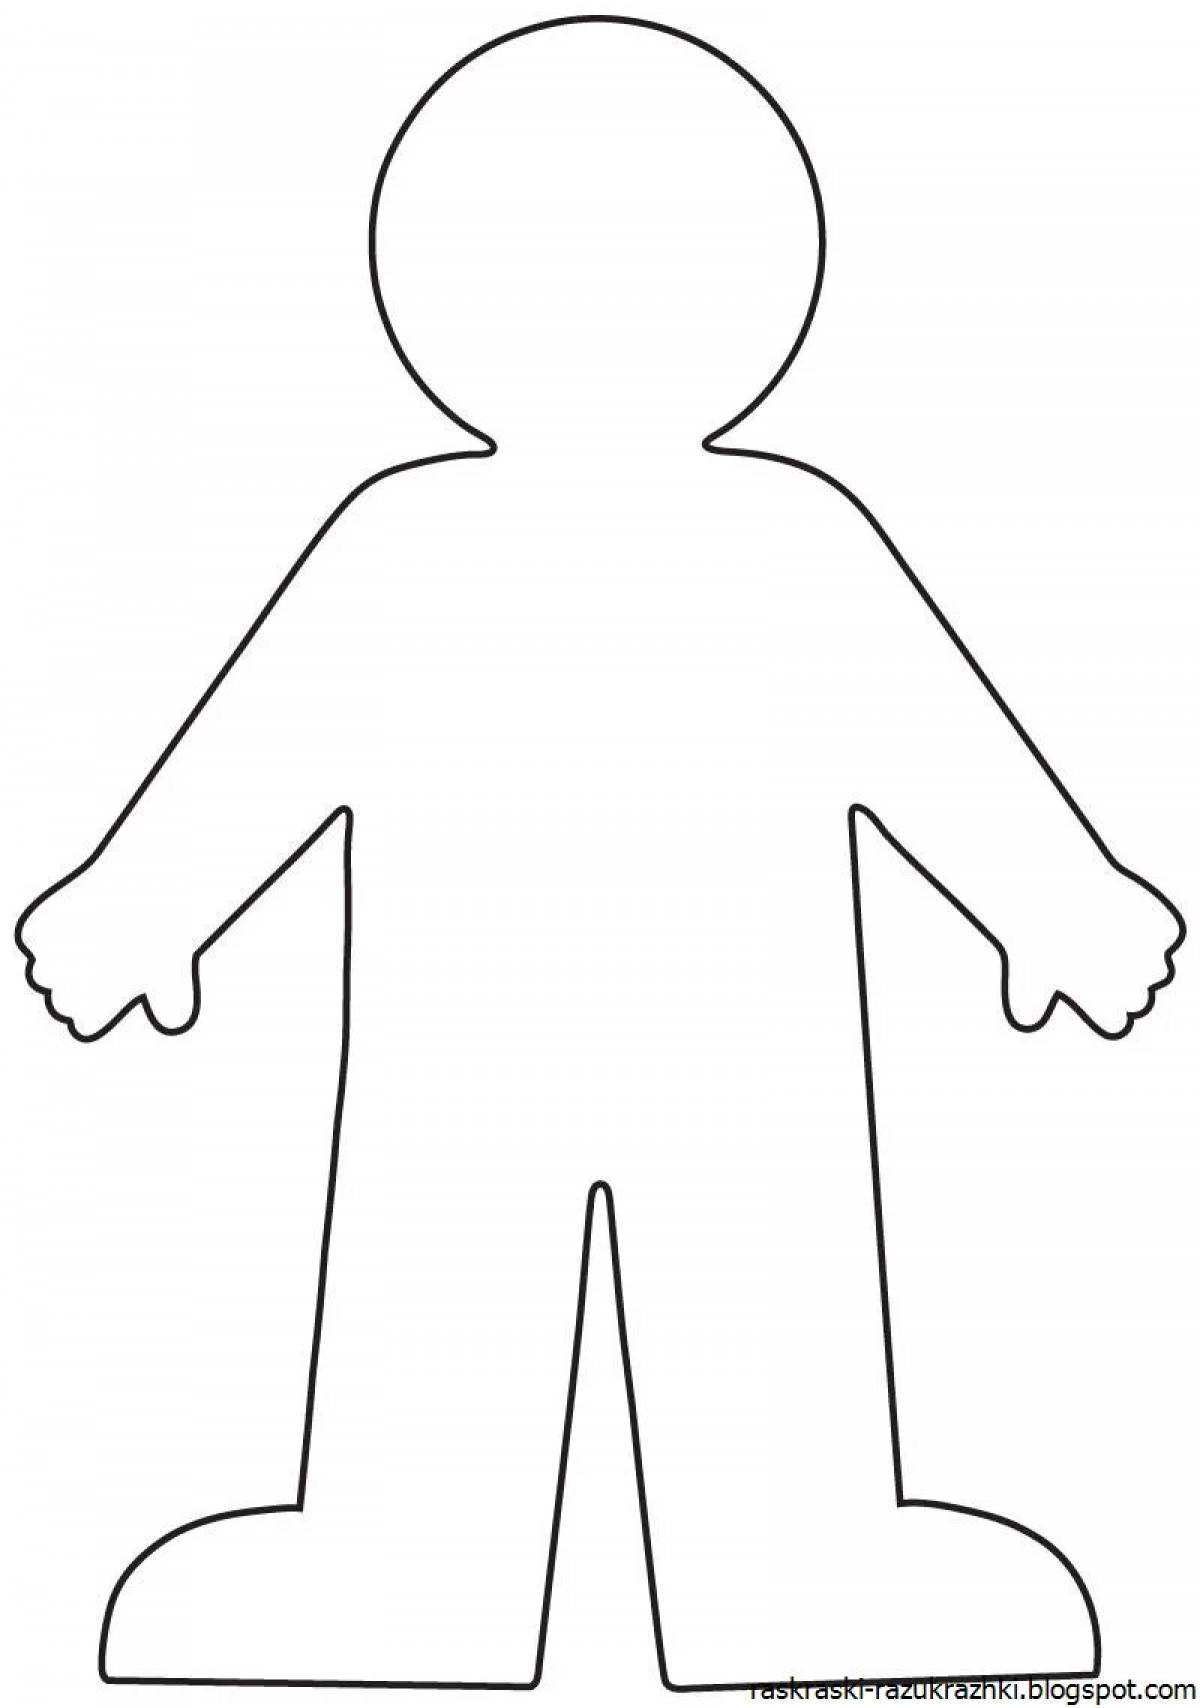 Silly man silhouette coloring book for kids